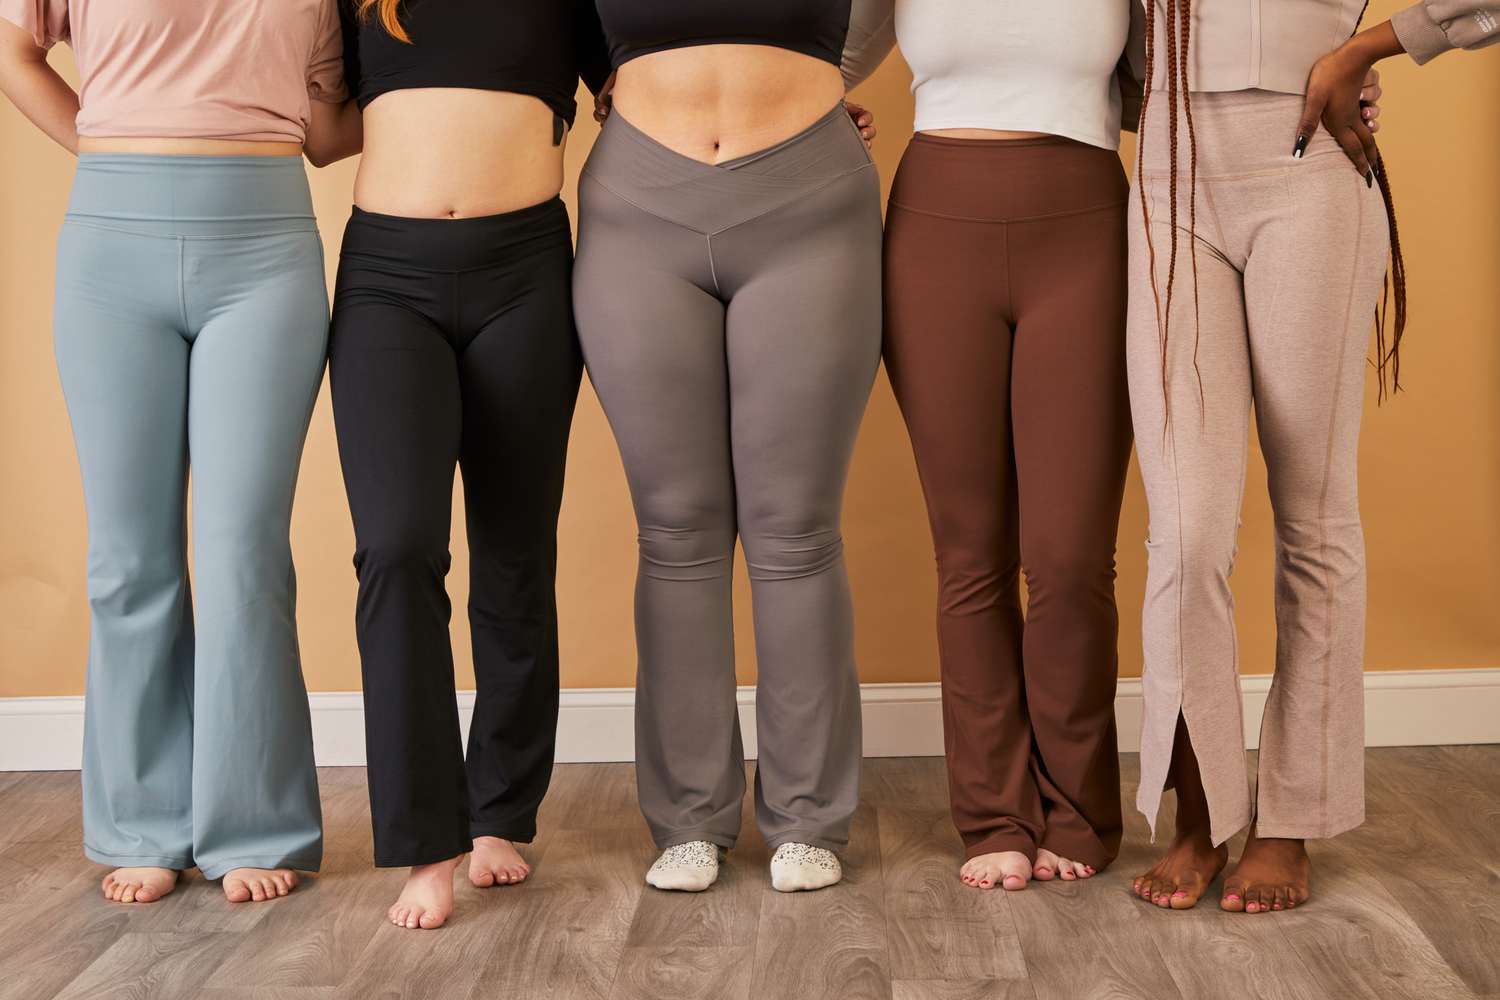 alissa troutman recommends teen yoga pants cameltoe pic